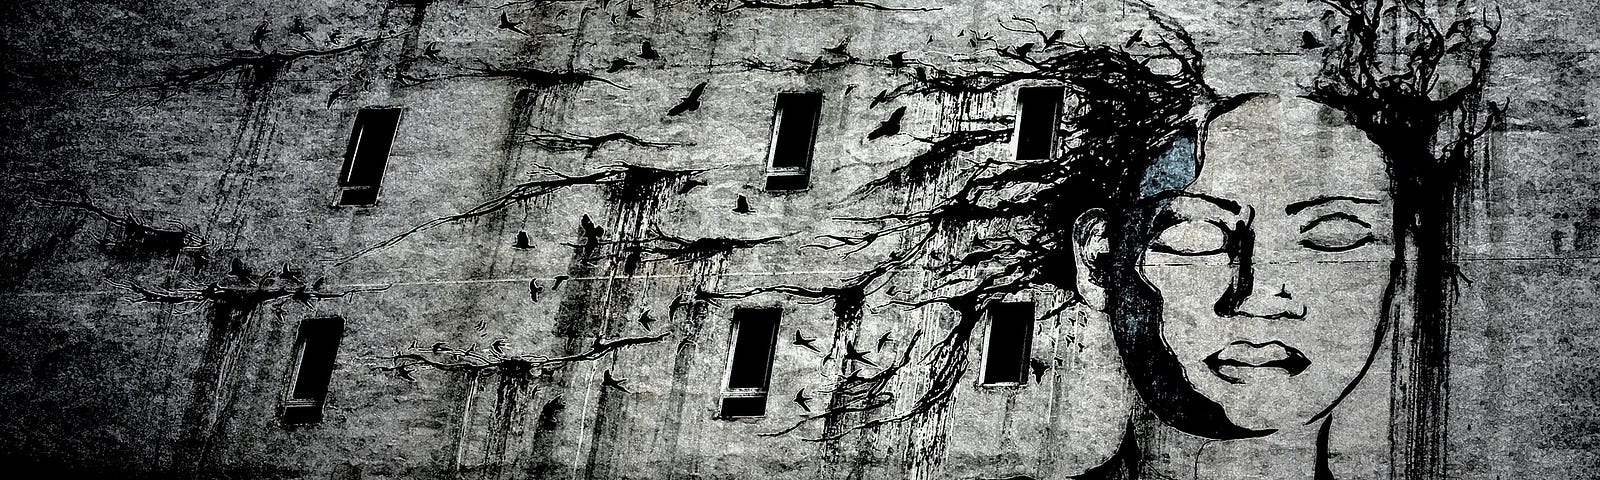 Large mural over tall concrete building of person with eyes closed. Markings suggest the mind is fleeing in the wind.